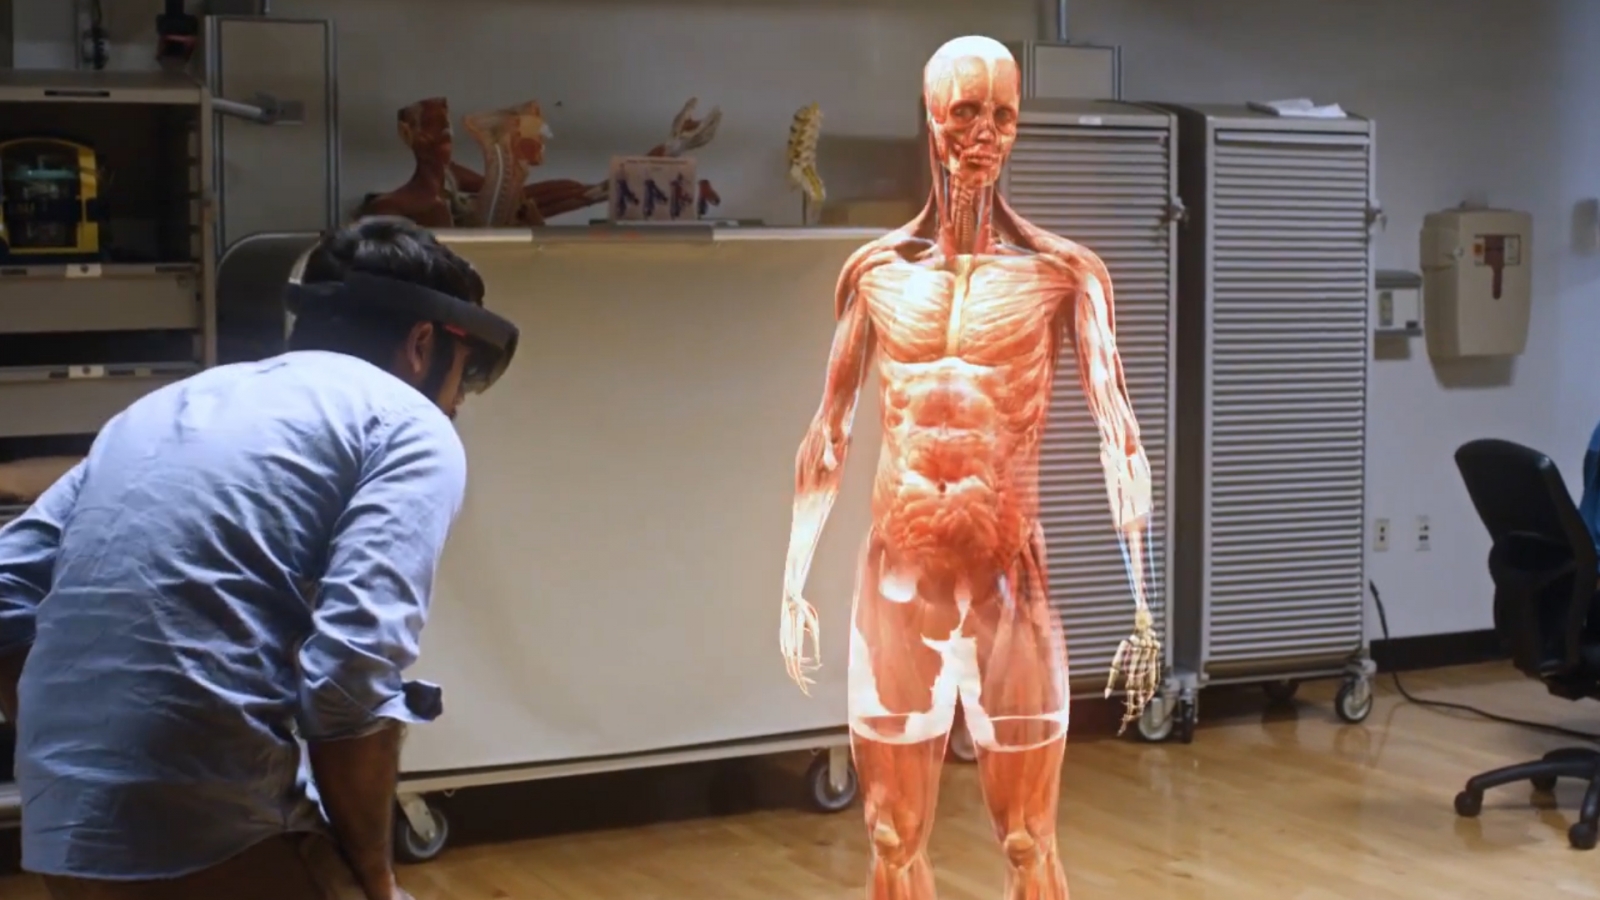 Microsoft Hololens: Company reveals what it feels like to use augmented ...